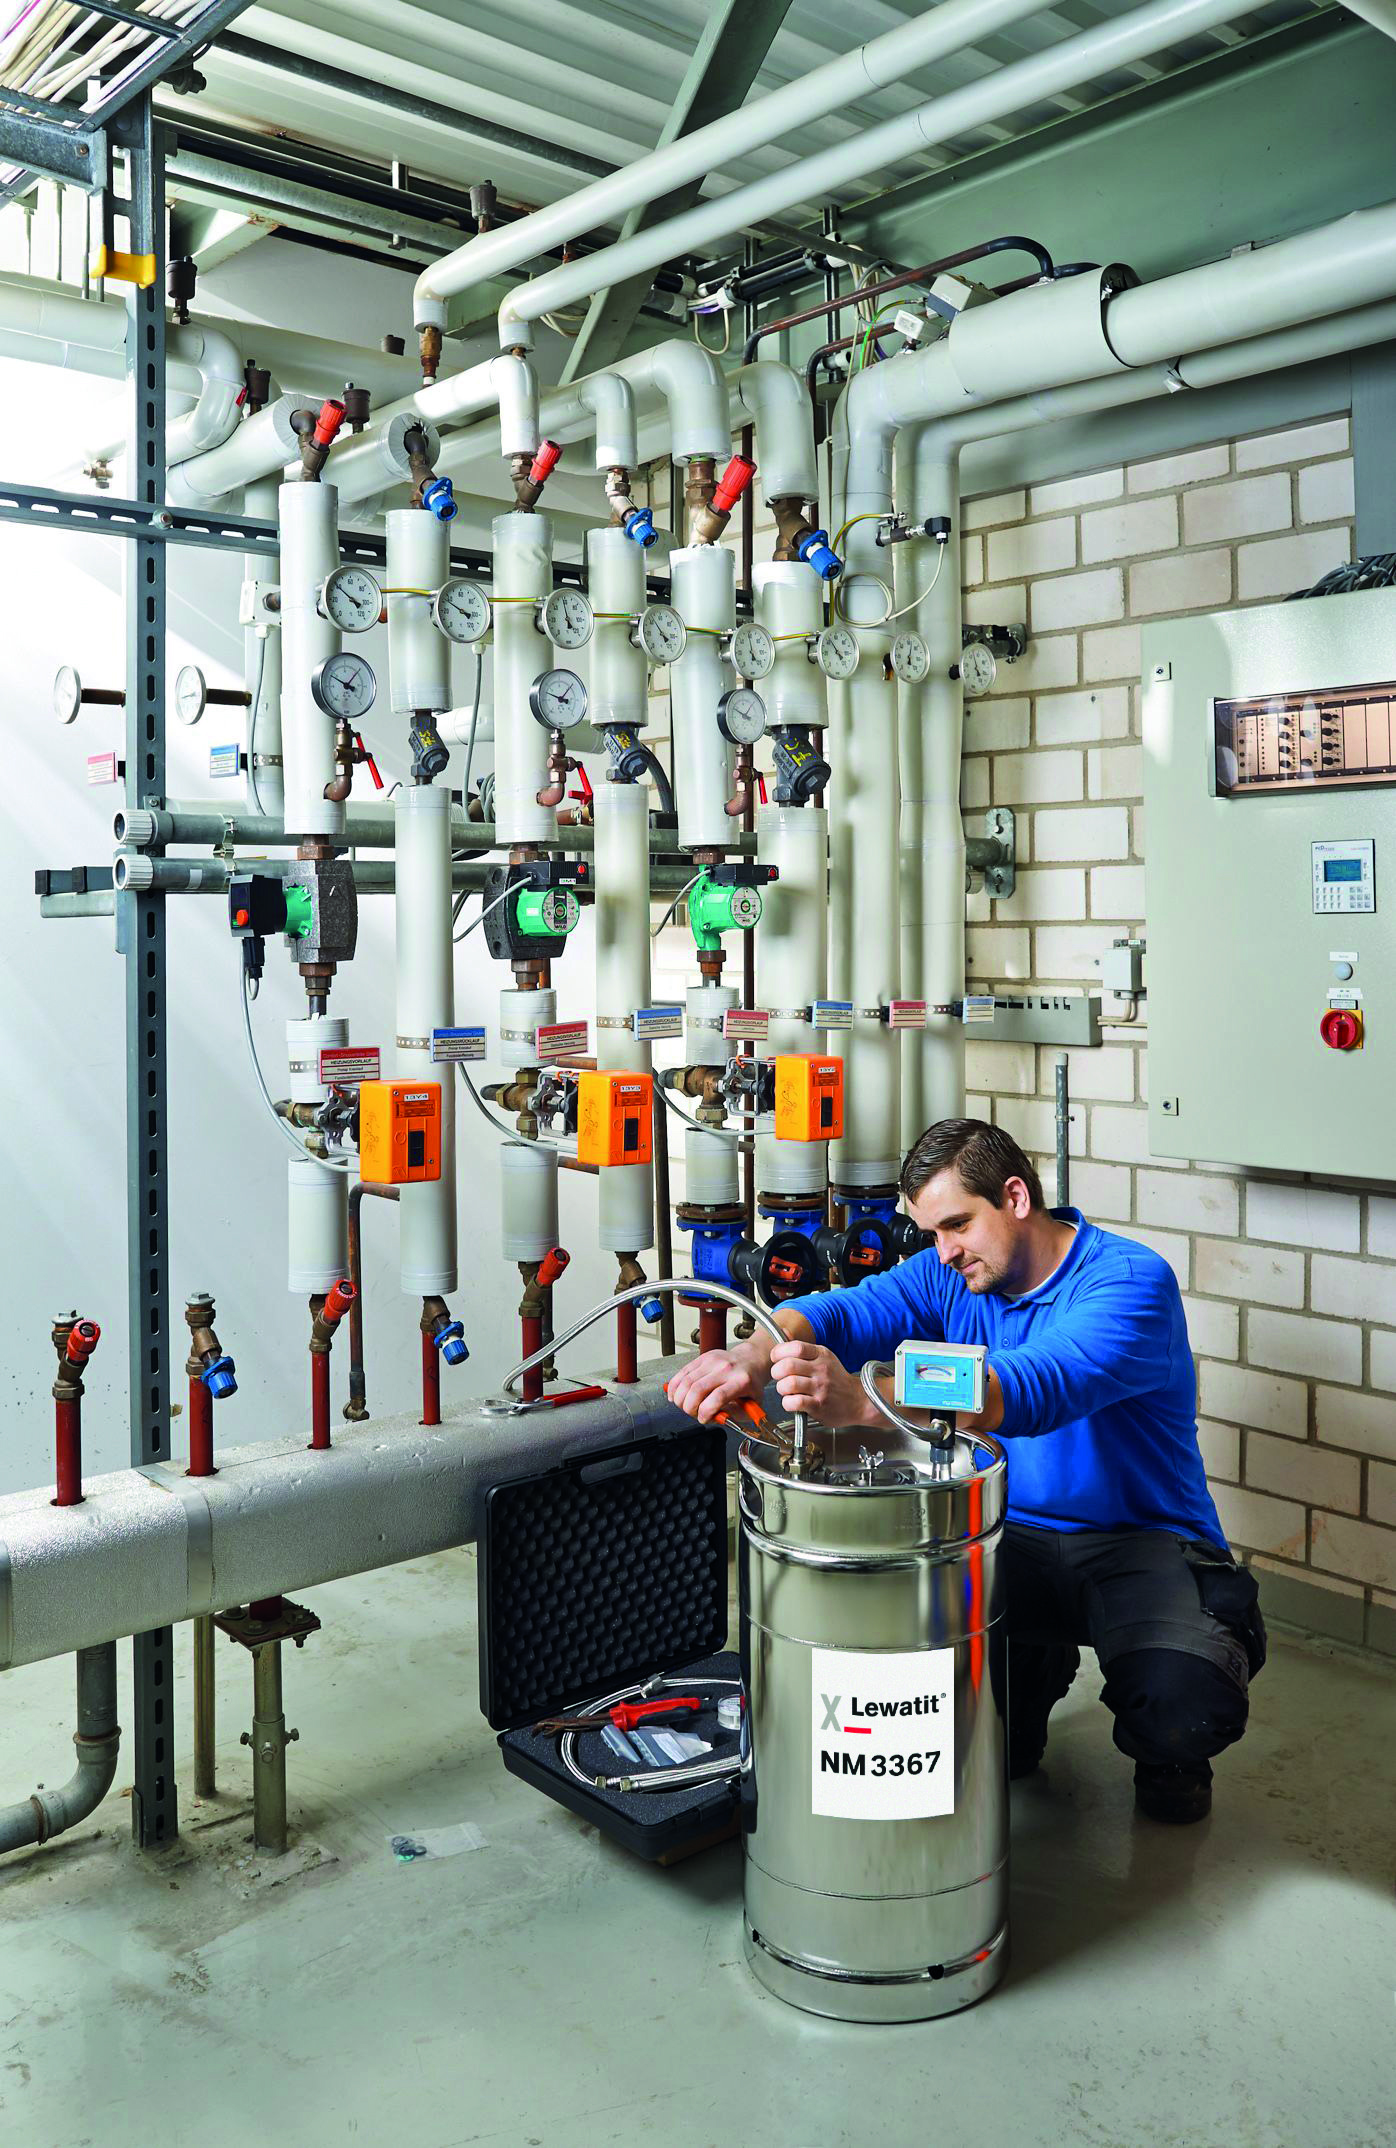 Lanxess has developed the Lewatit NM 3367 mixed-bed ion exchange resin to demineralize the water used to charge and top up modern hot water heating systems.